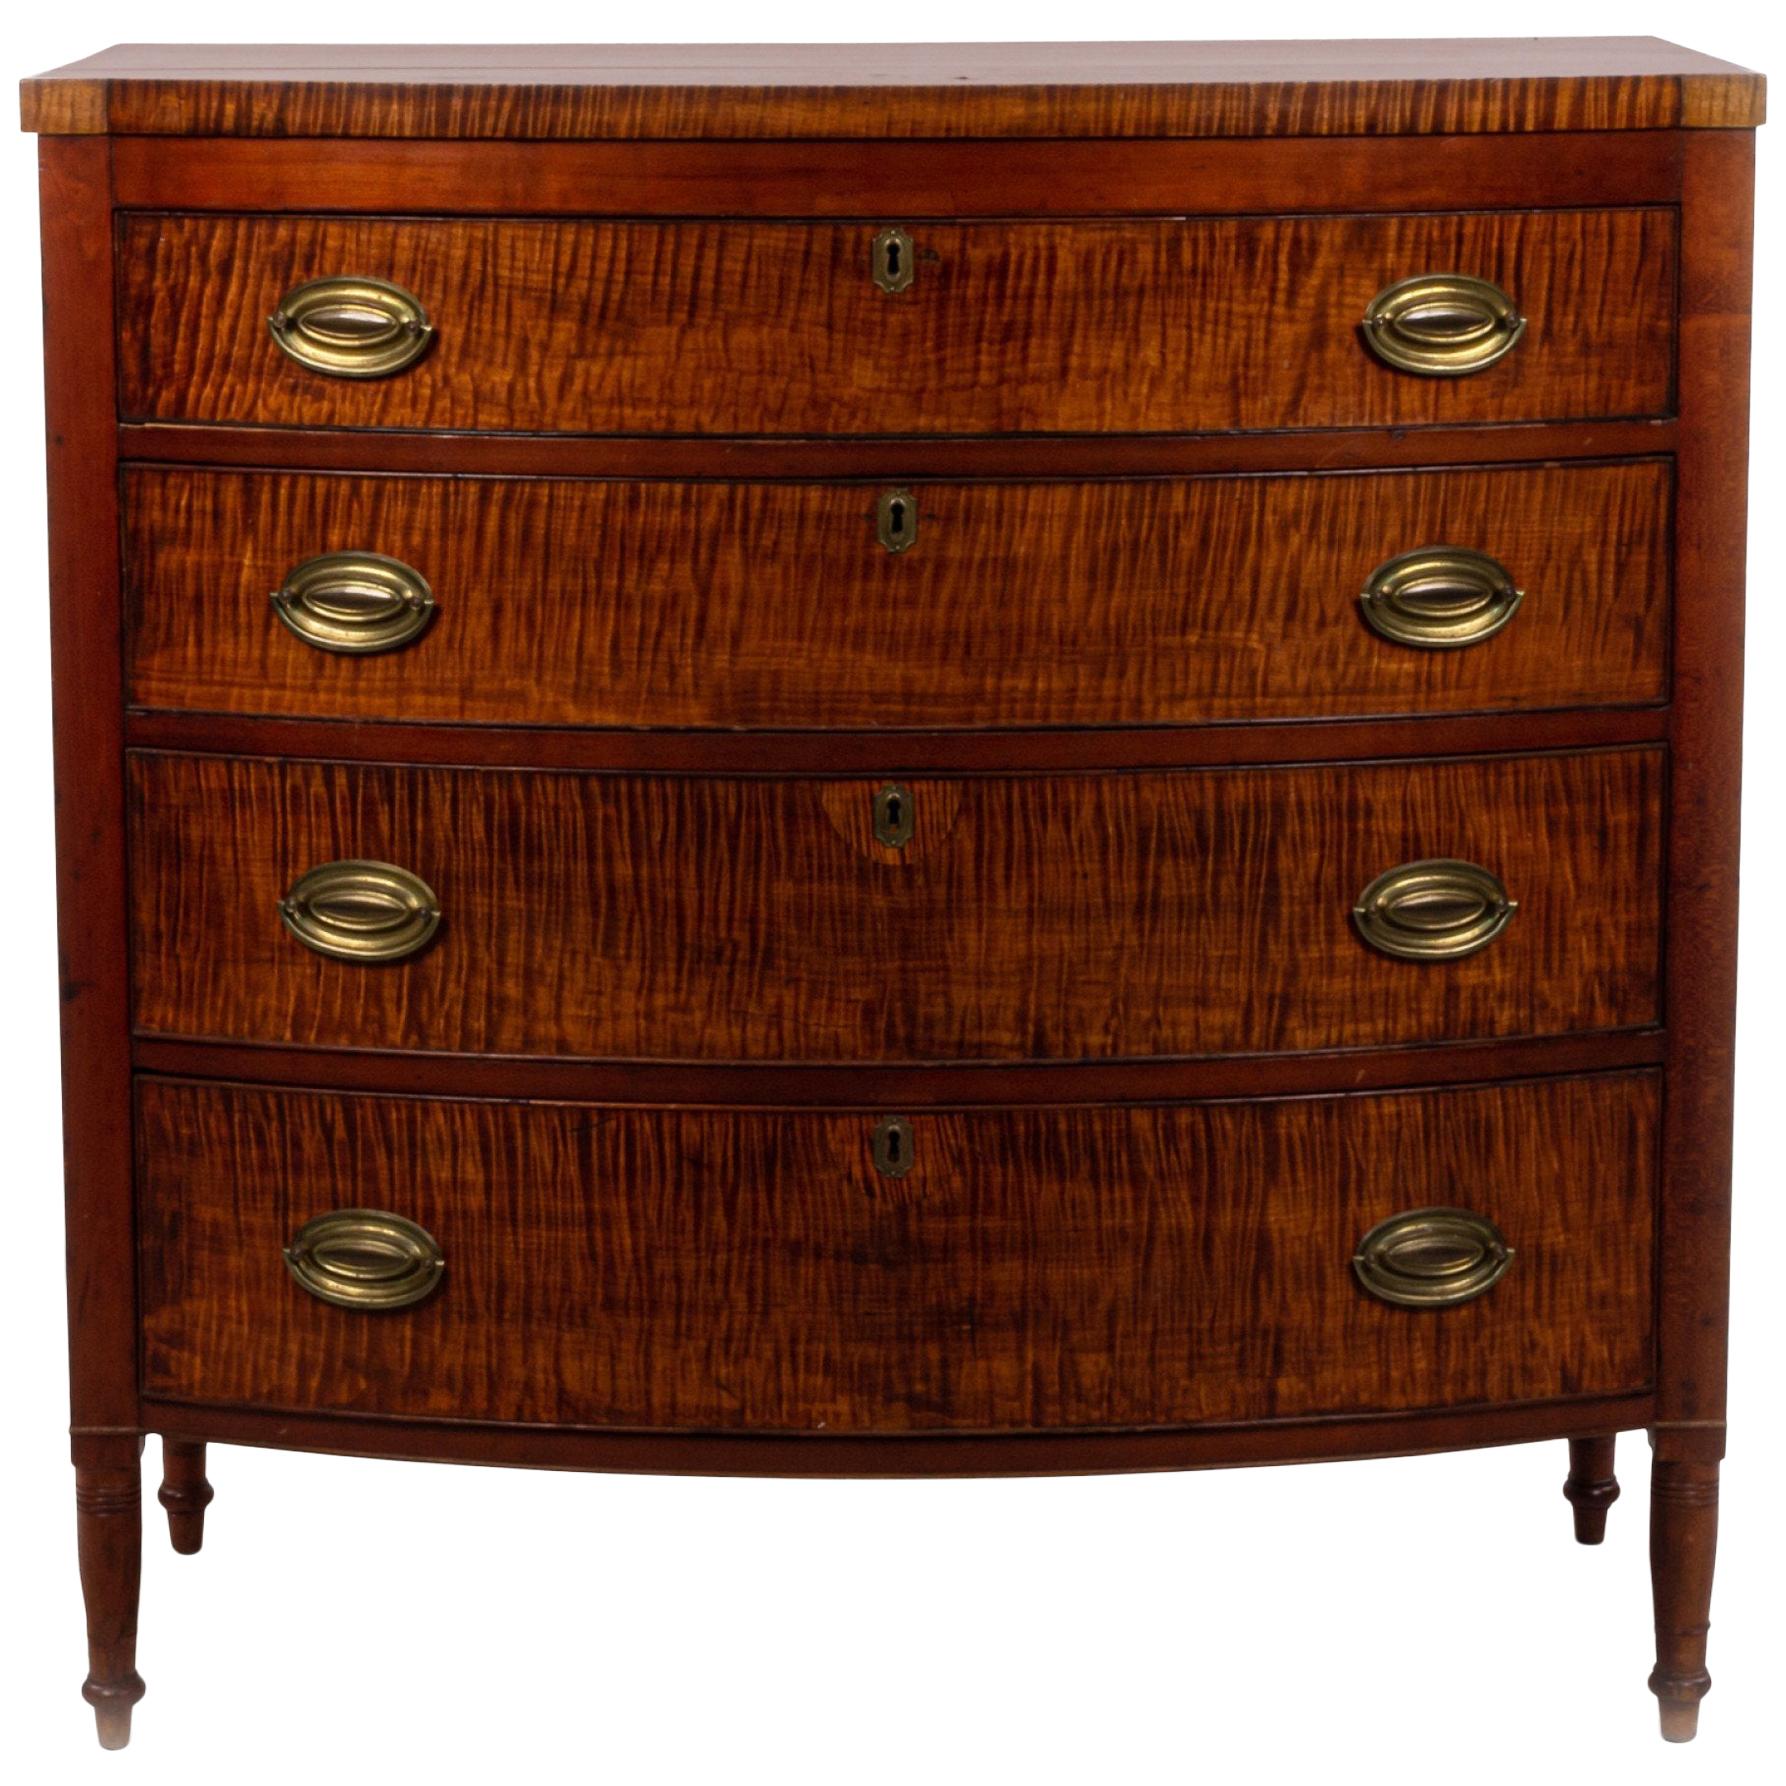 Federal Bowed Front Mahogany Chest of Drawers